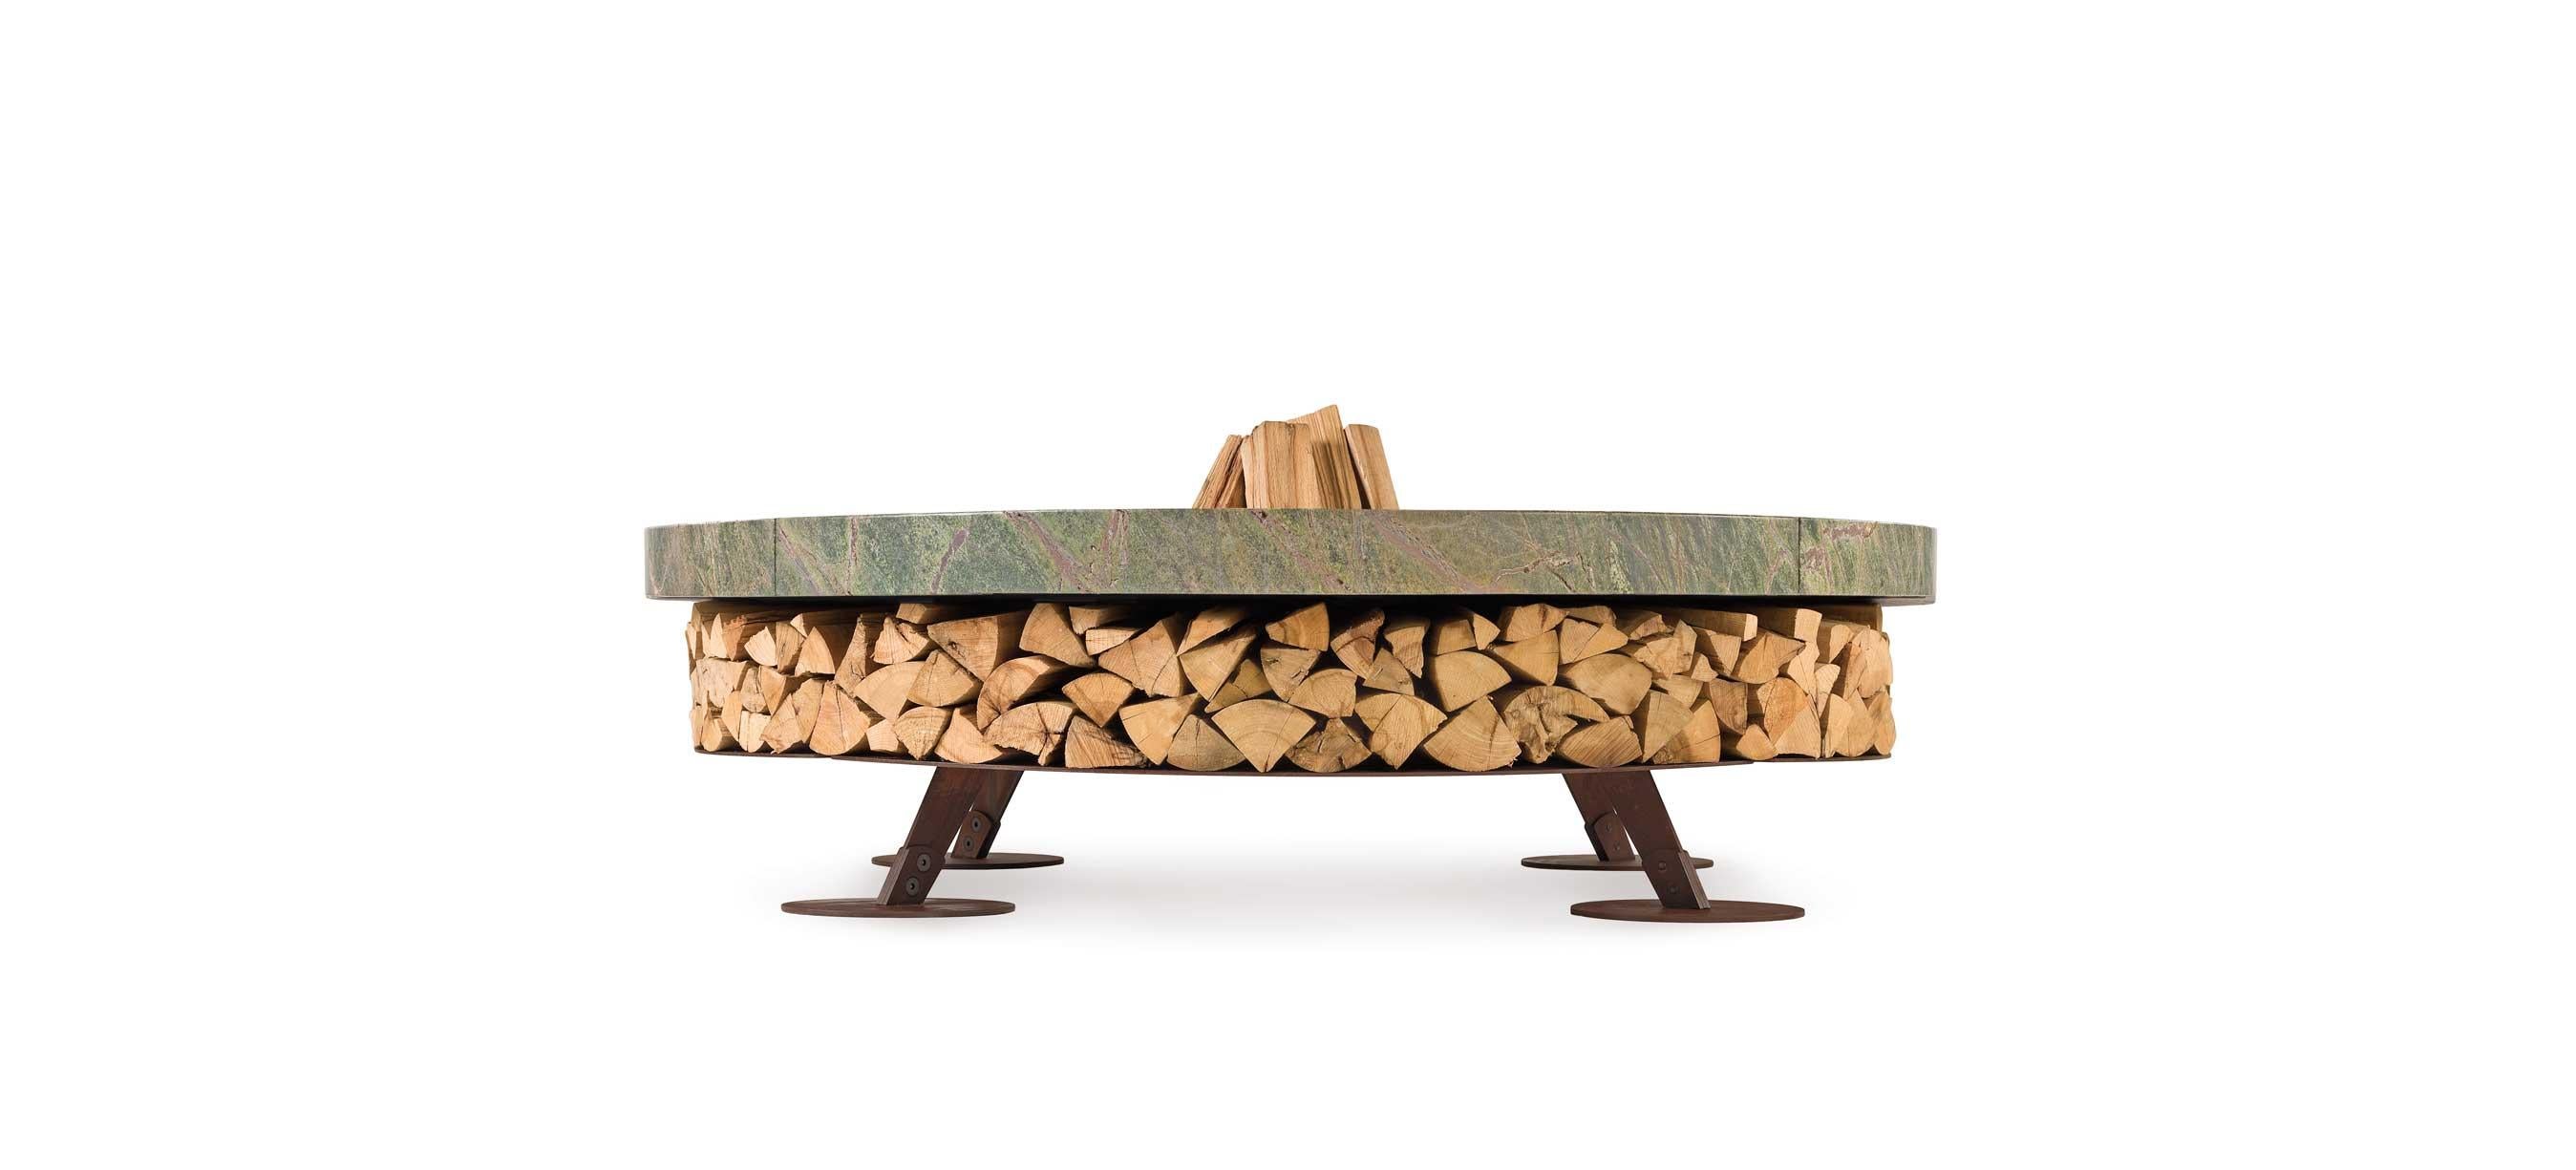 Ercole small rain forest green marble fire pit by AK47 Design.

Rain Forest Green marble fire pit Ø1500 mm.
Ercole is a outdoor wood-burning fire pit.
It is born by the union of two raw materials – the steel as a structural element and the